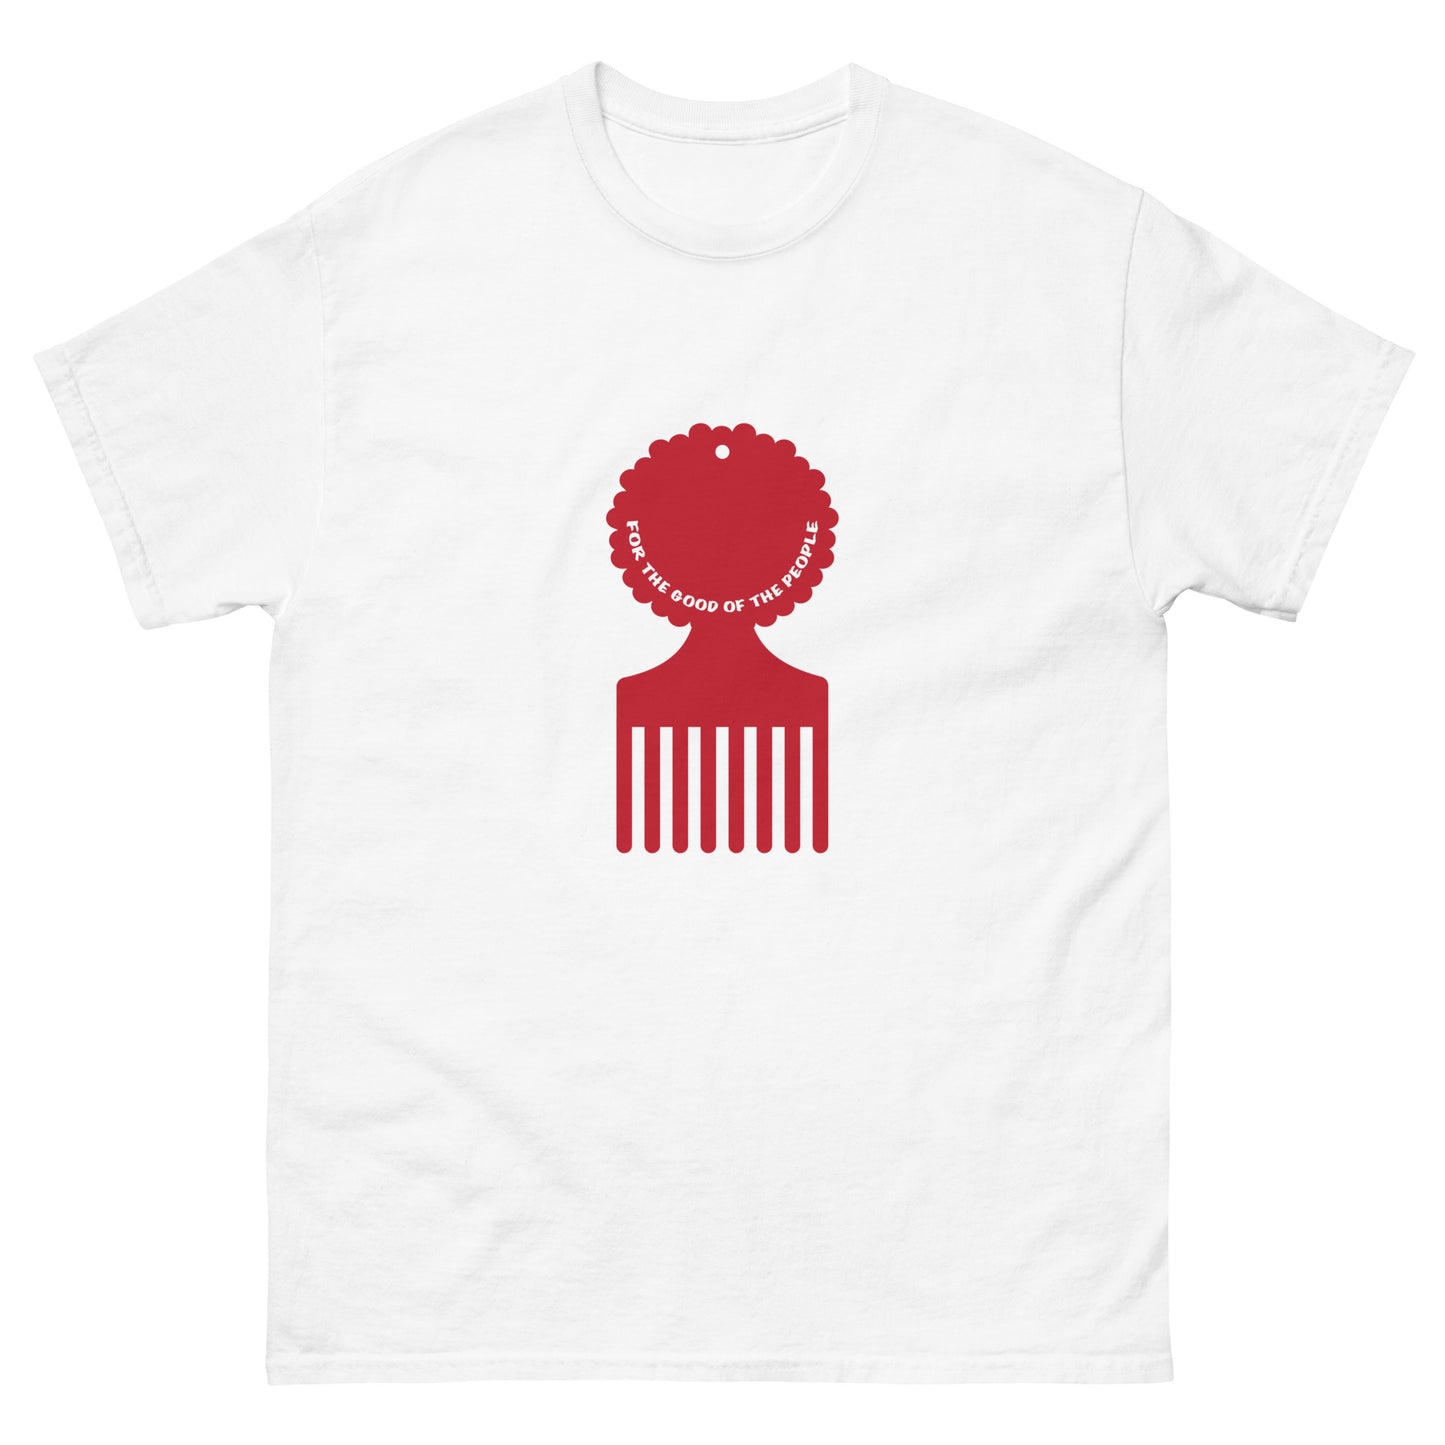 Men's white tee with red afro pick in the center of shirt, with for the good of the people in white inside the afro pick's handle.